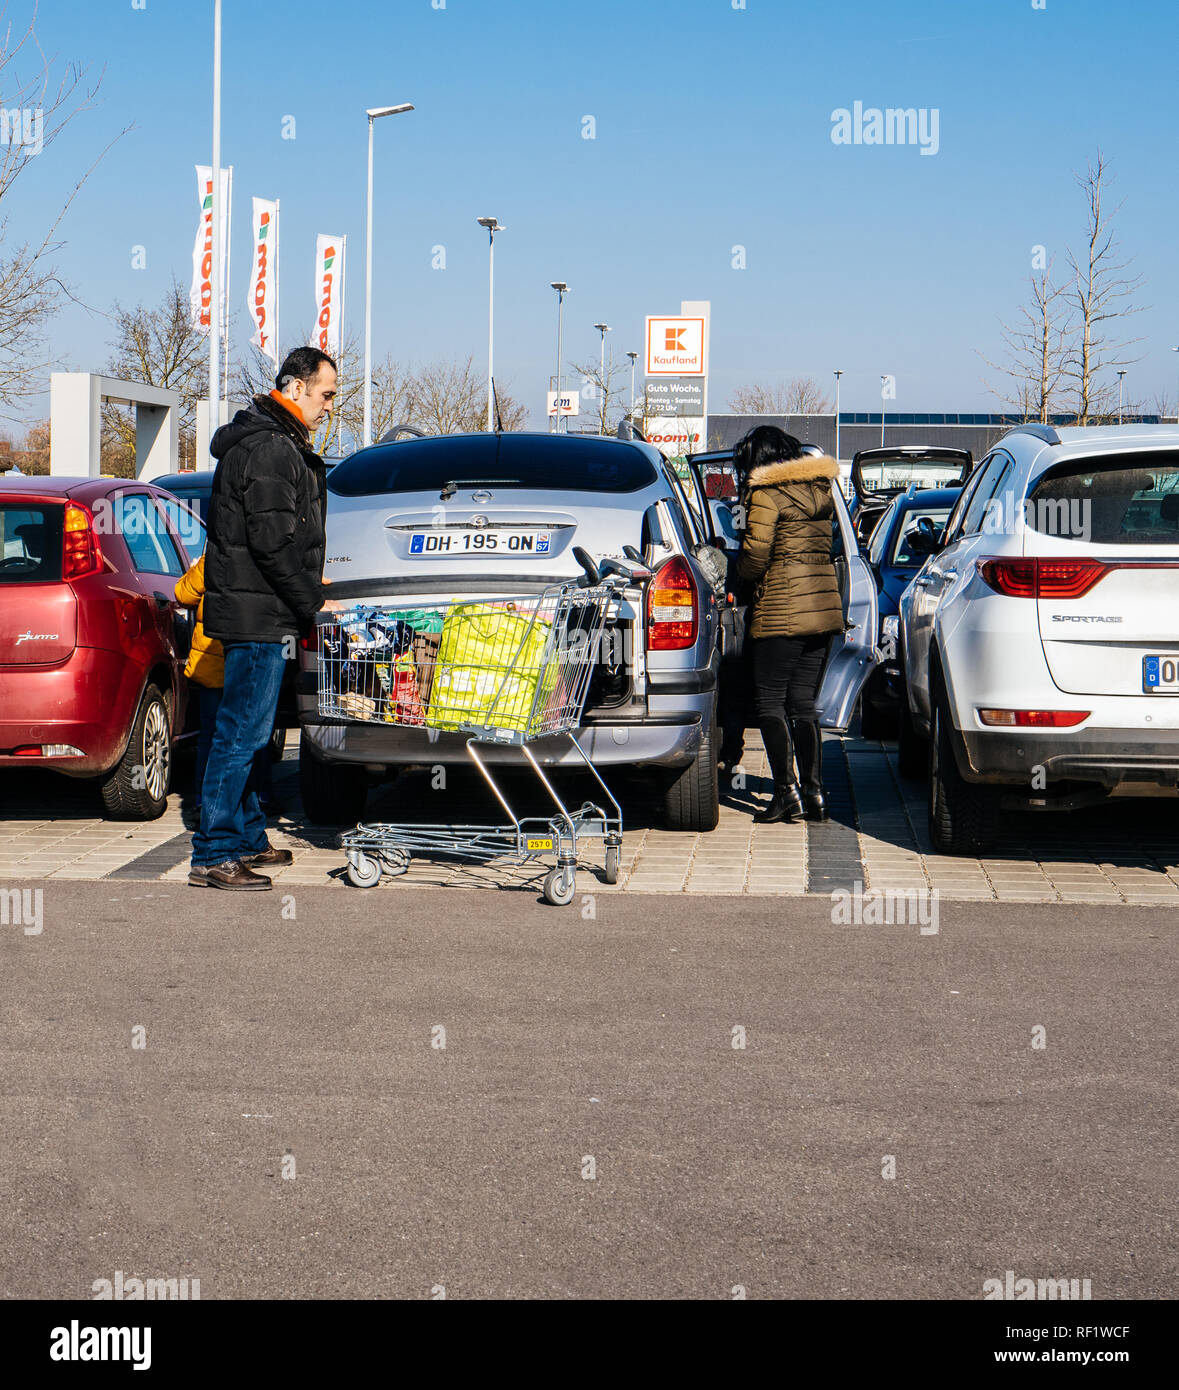 KARLSRUHE, GERMANY - FEB 24, 2018: Eastern ethnicity family couple loading groceries in Kaufland supermarket food parking Stock Photo